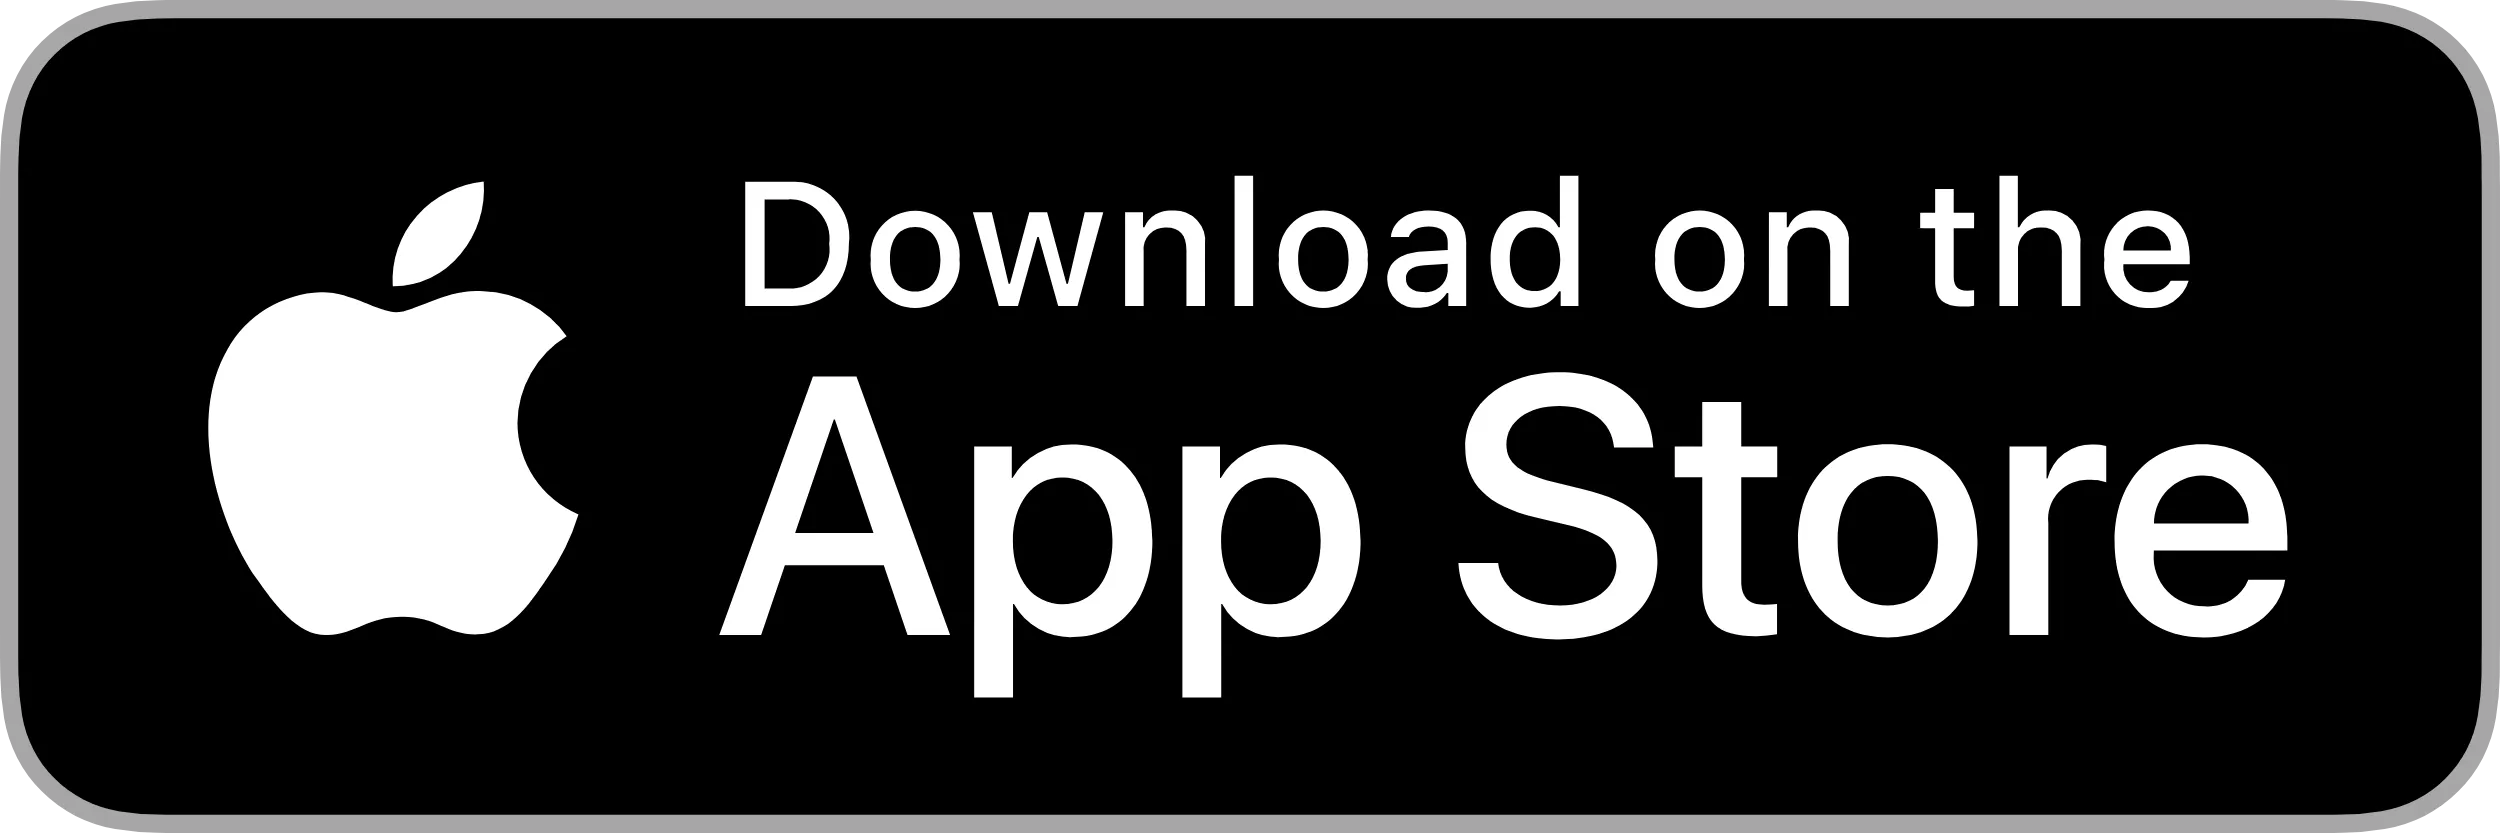 appstore playstore logo